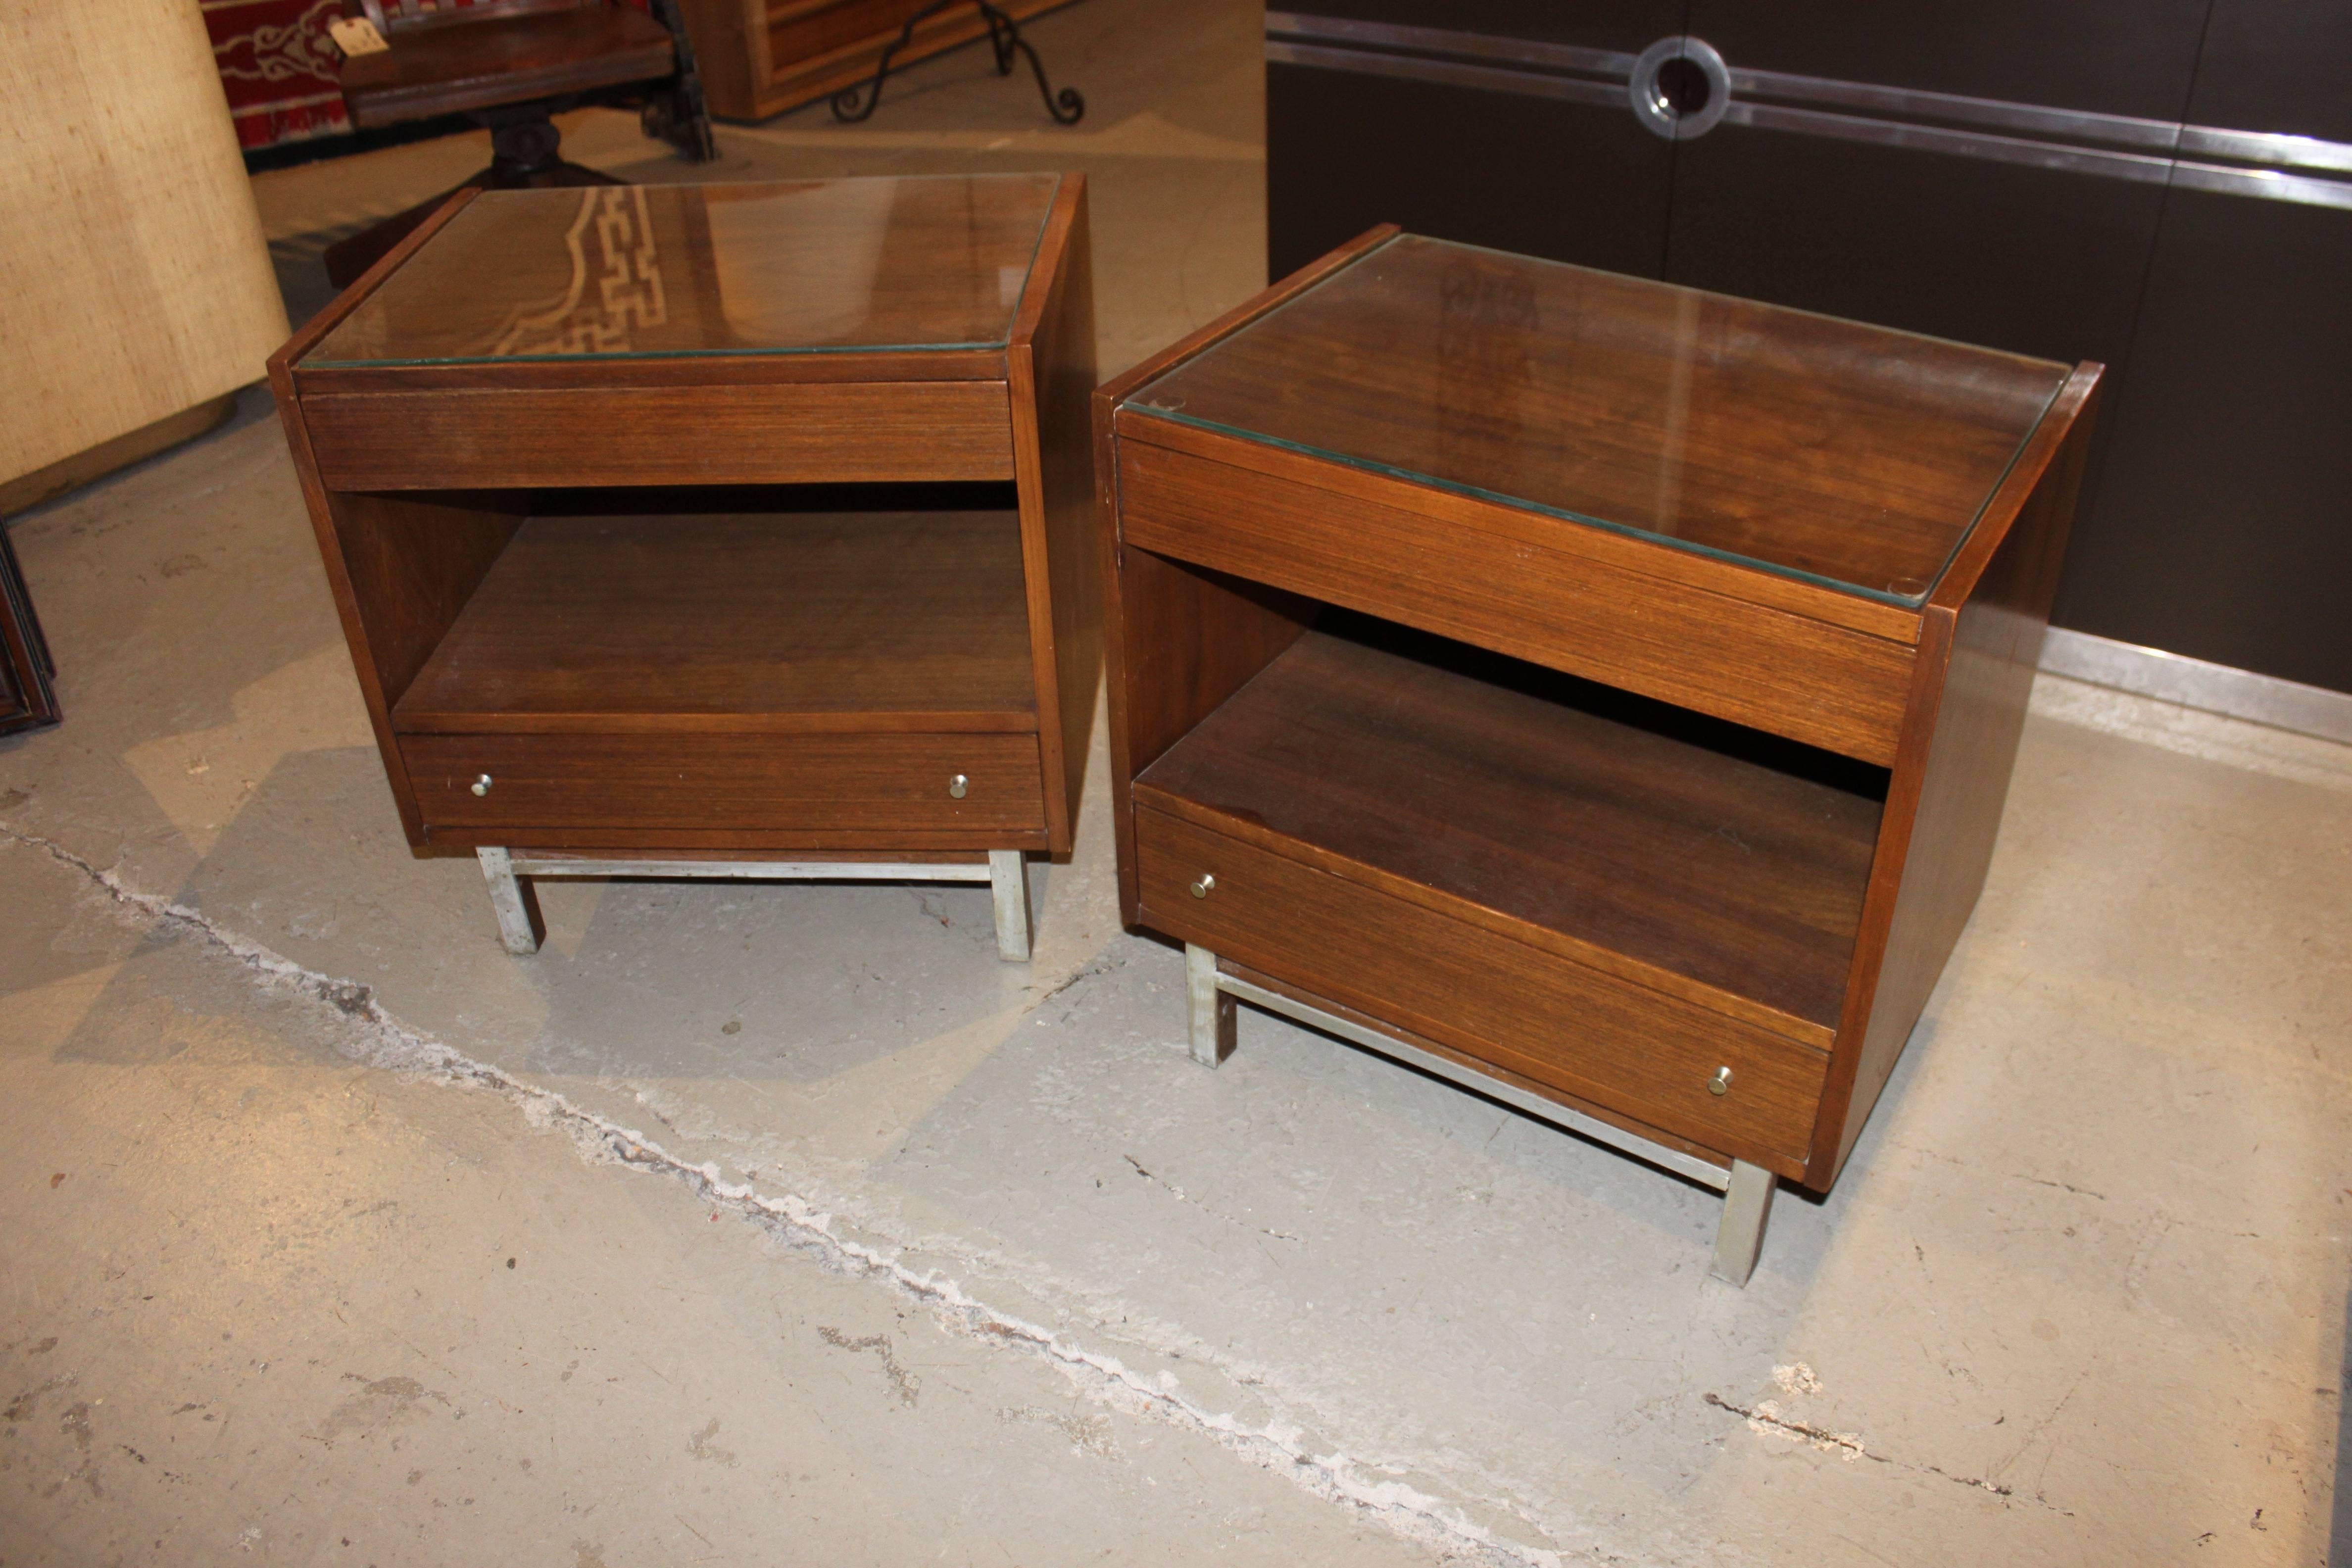 Nice pair of Mid-Century Modern nightstands by American of Martinsville. In good vintage condition. Come with glass top that was made by the prior owner.